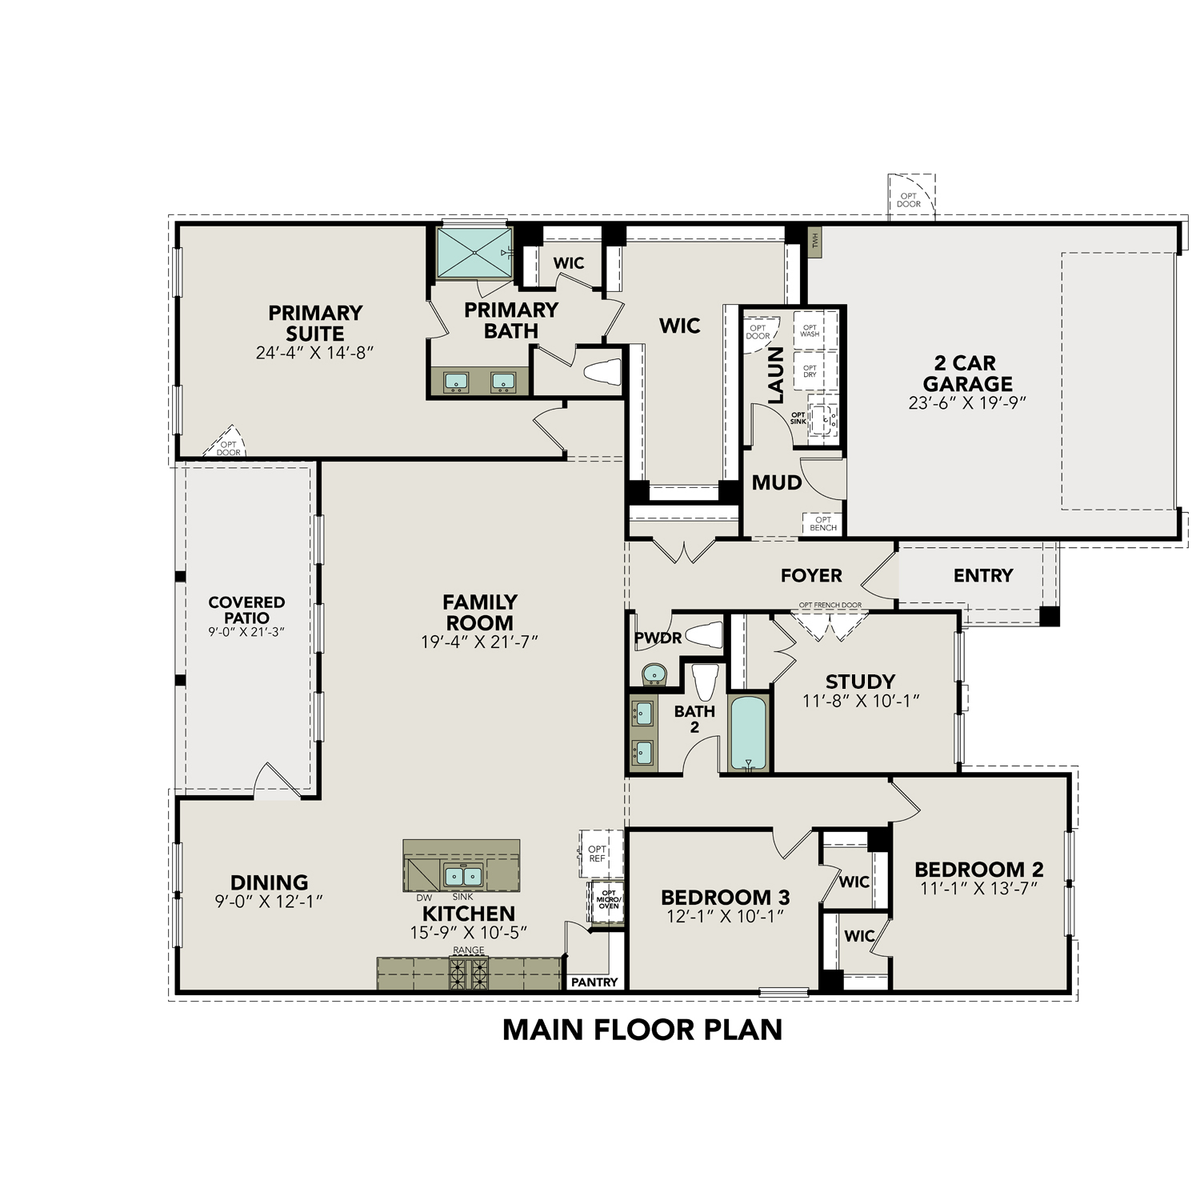 1 - The Rockford D floor plan layout for 148 Mason Lane in Davidson Homes' The Reserve at Potranco Oaks community.